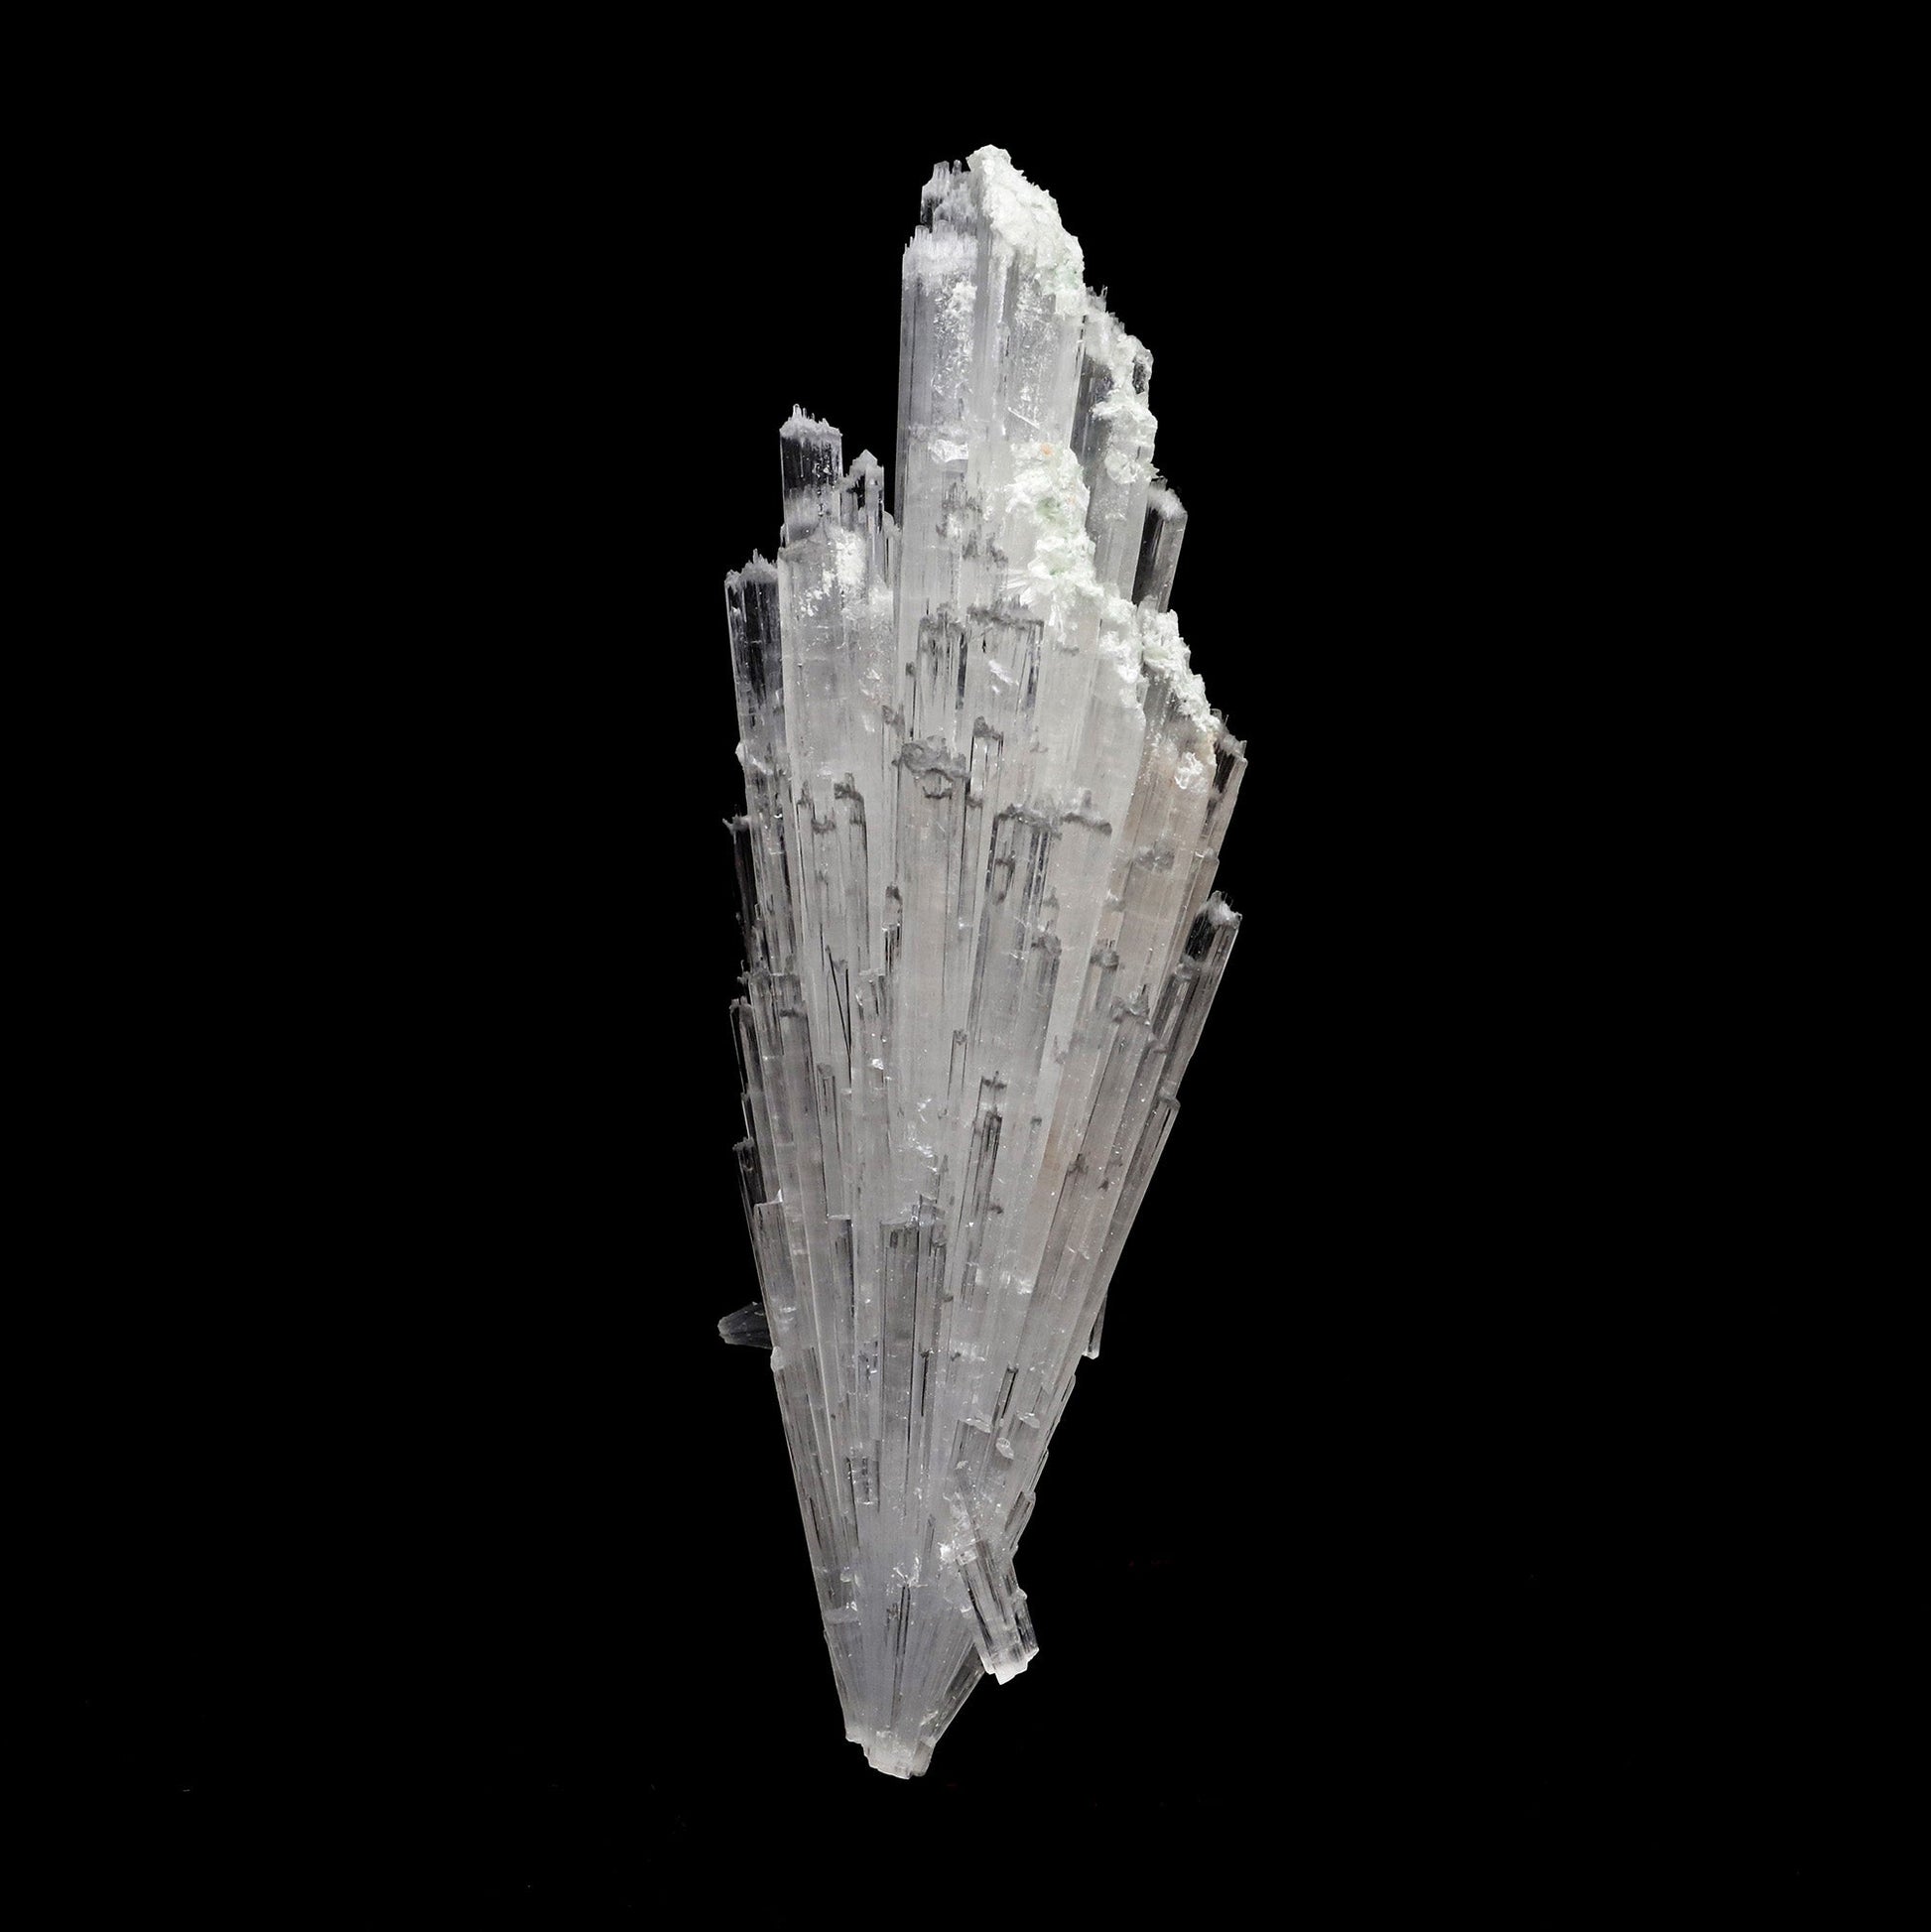 Scolecite Accular Spray Natural Mineral Specimen # B 5279  https://www.superbminerals.us/products/scolecite-accular-spray-natural-mineral-specimen-b-5279  Features: This specimen features a large, radial formation of colorless, transparent, lustrous acicular Scolecite crystals on peach-colored Stilbite. Primary Mineral(s): Scolecite Secondary Mineral(s): N/AMatrix: N/A 6 Inch x 2.5 InchWeight : 145 GmsLocality: Aurangabad, Maharashtra, India Year of Discovery: 2021